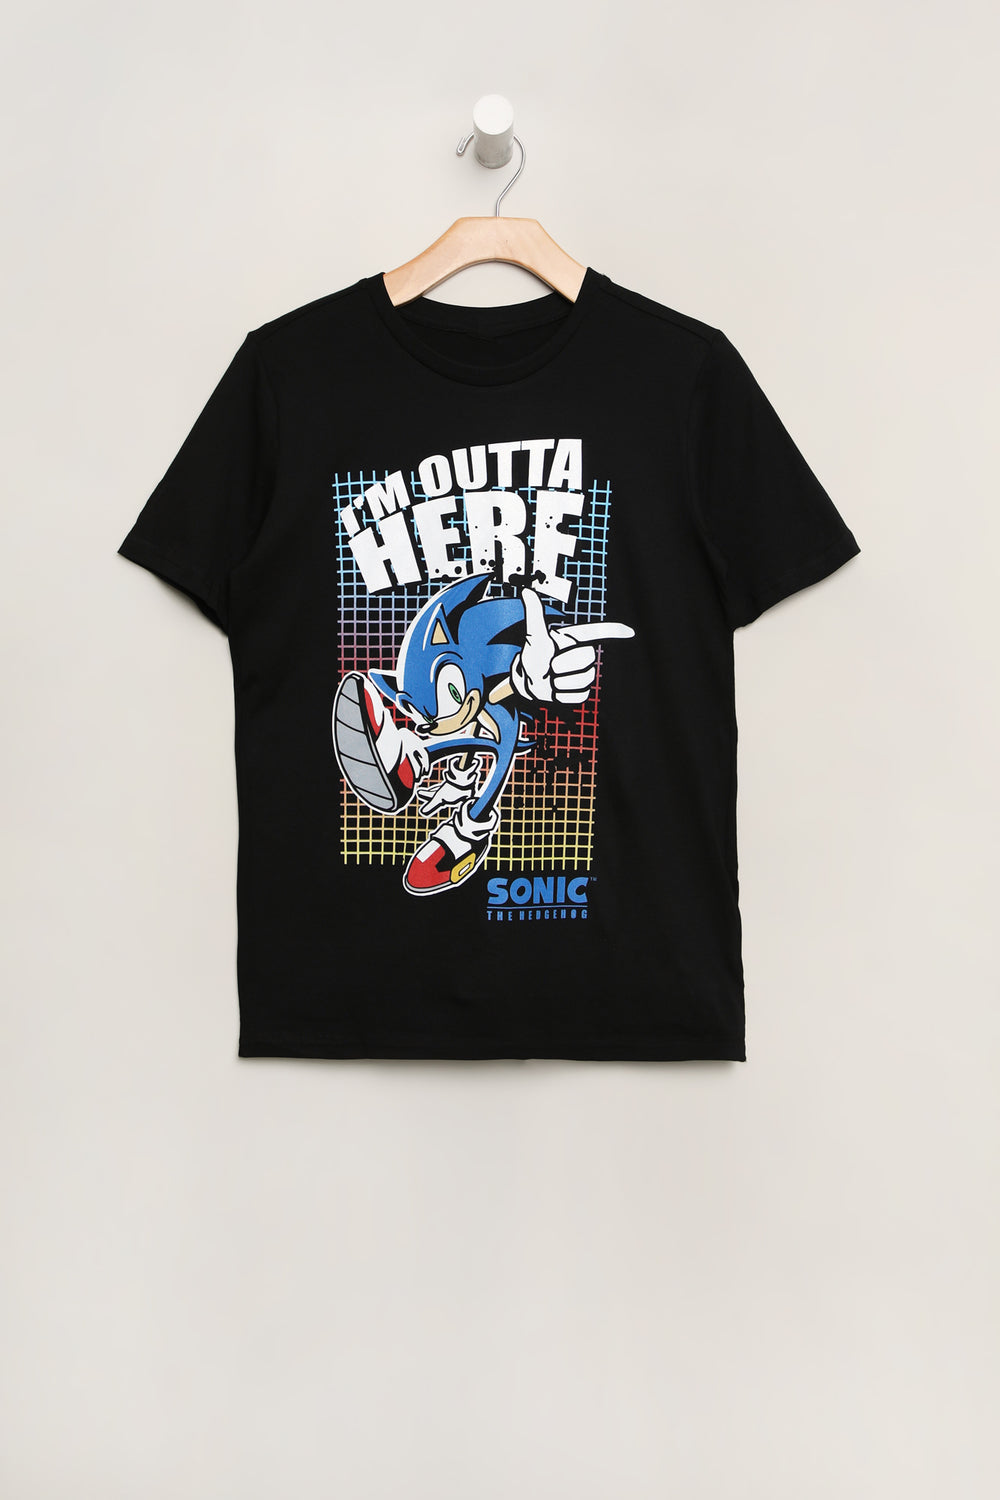 Youth Sonic The Hedgehog I'm Outta Here T-Shirt Youth Sonic The Hedgehog I'm Outta Here T-Shirt